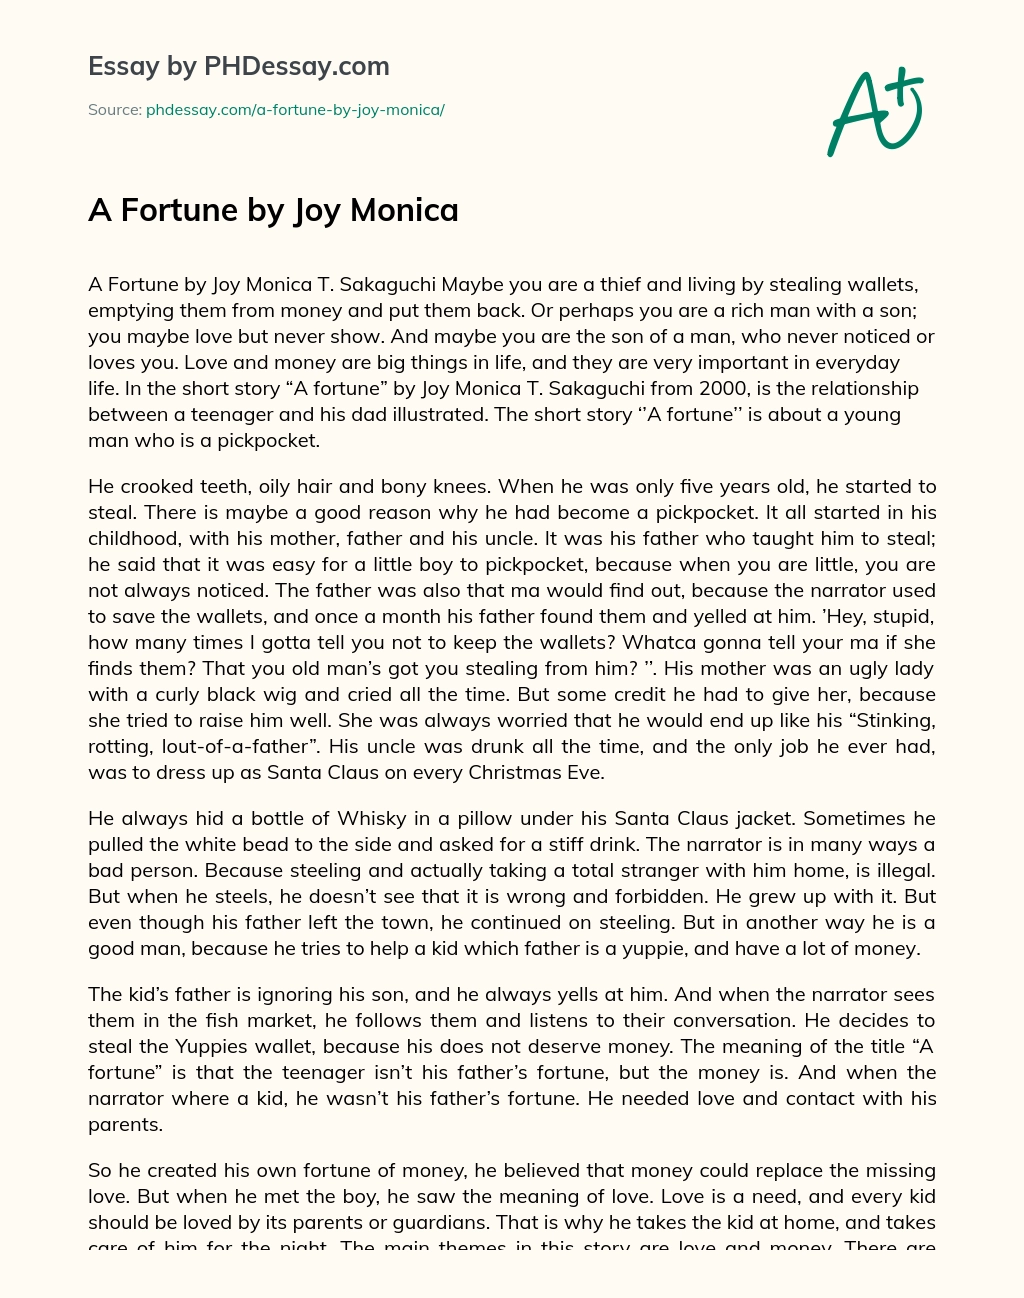 A Fortune by Joy Monica essay